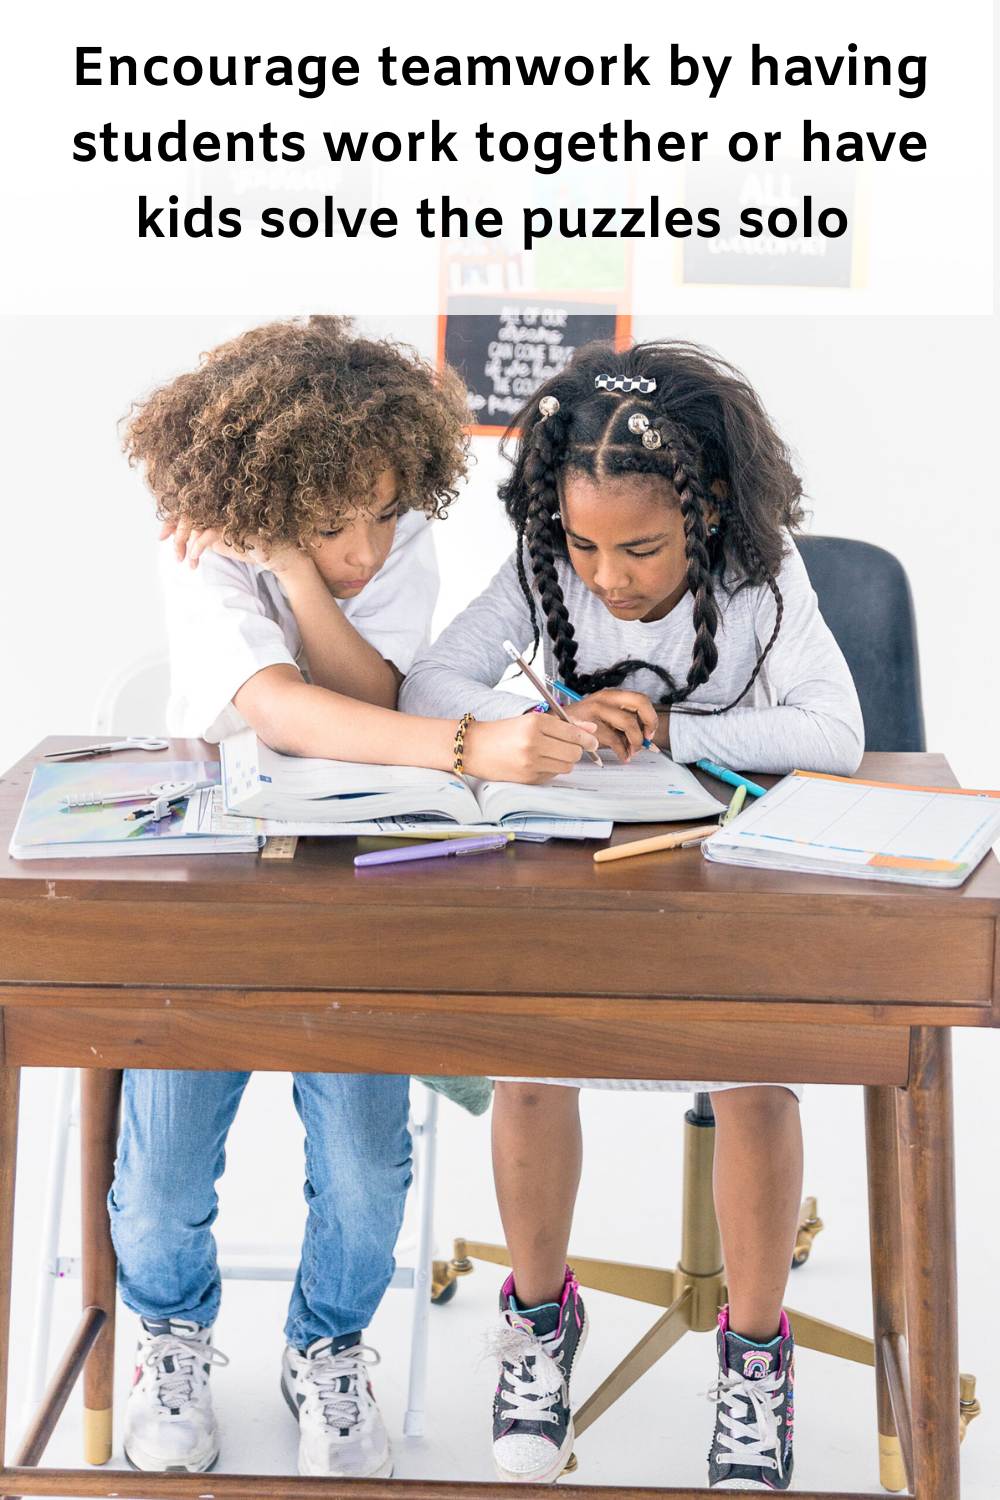 text "encourage teamwork by having students work together or have kids solve the puzzles solo" with a picture of  two children working at a desk together